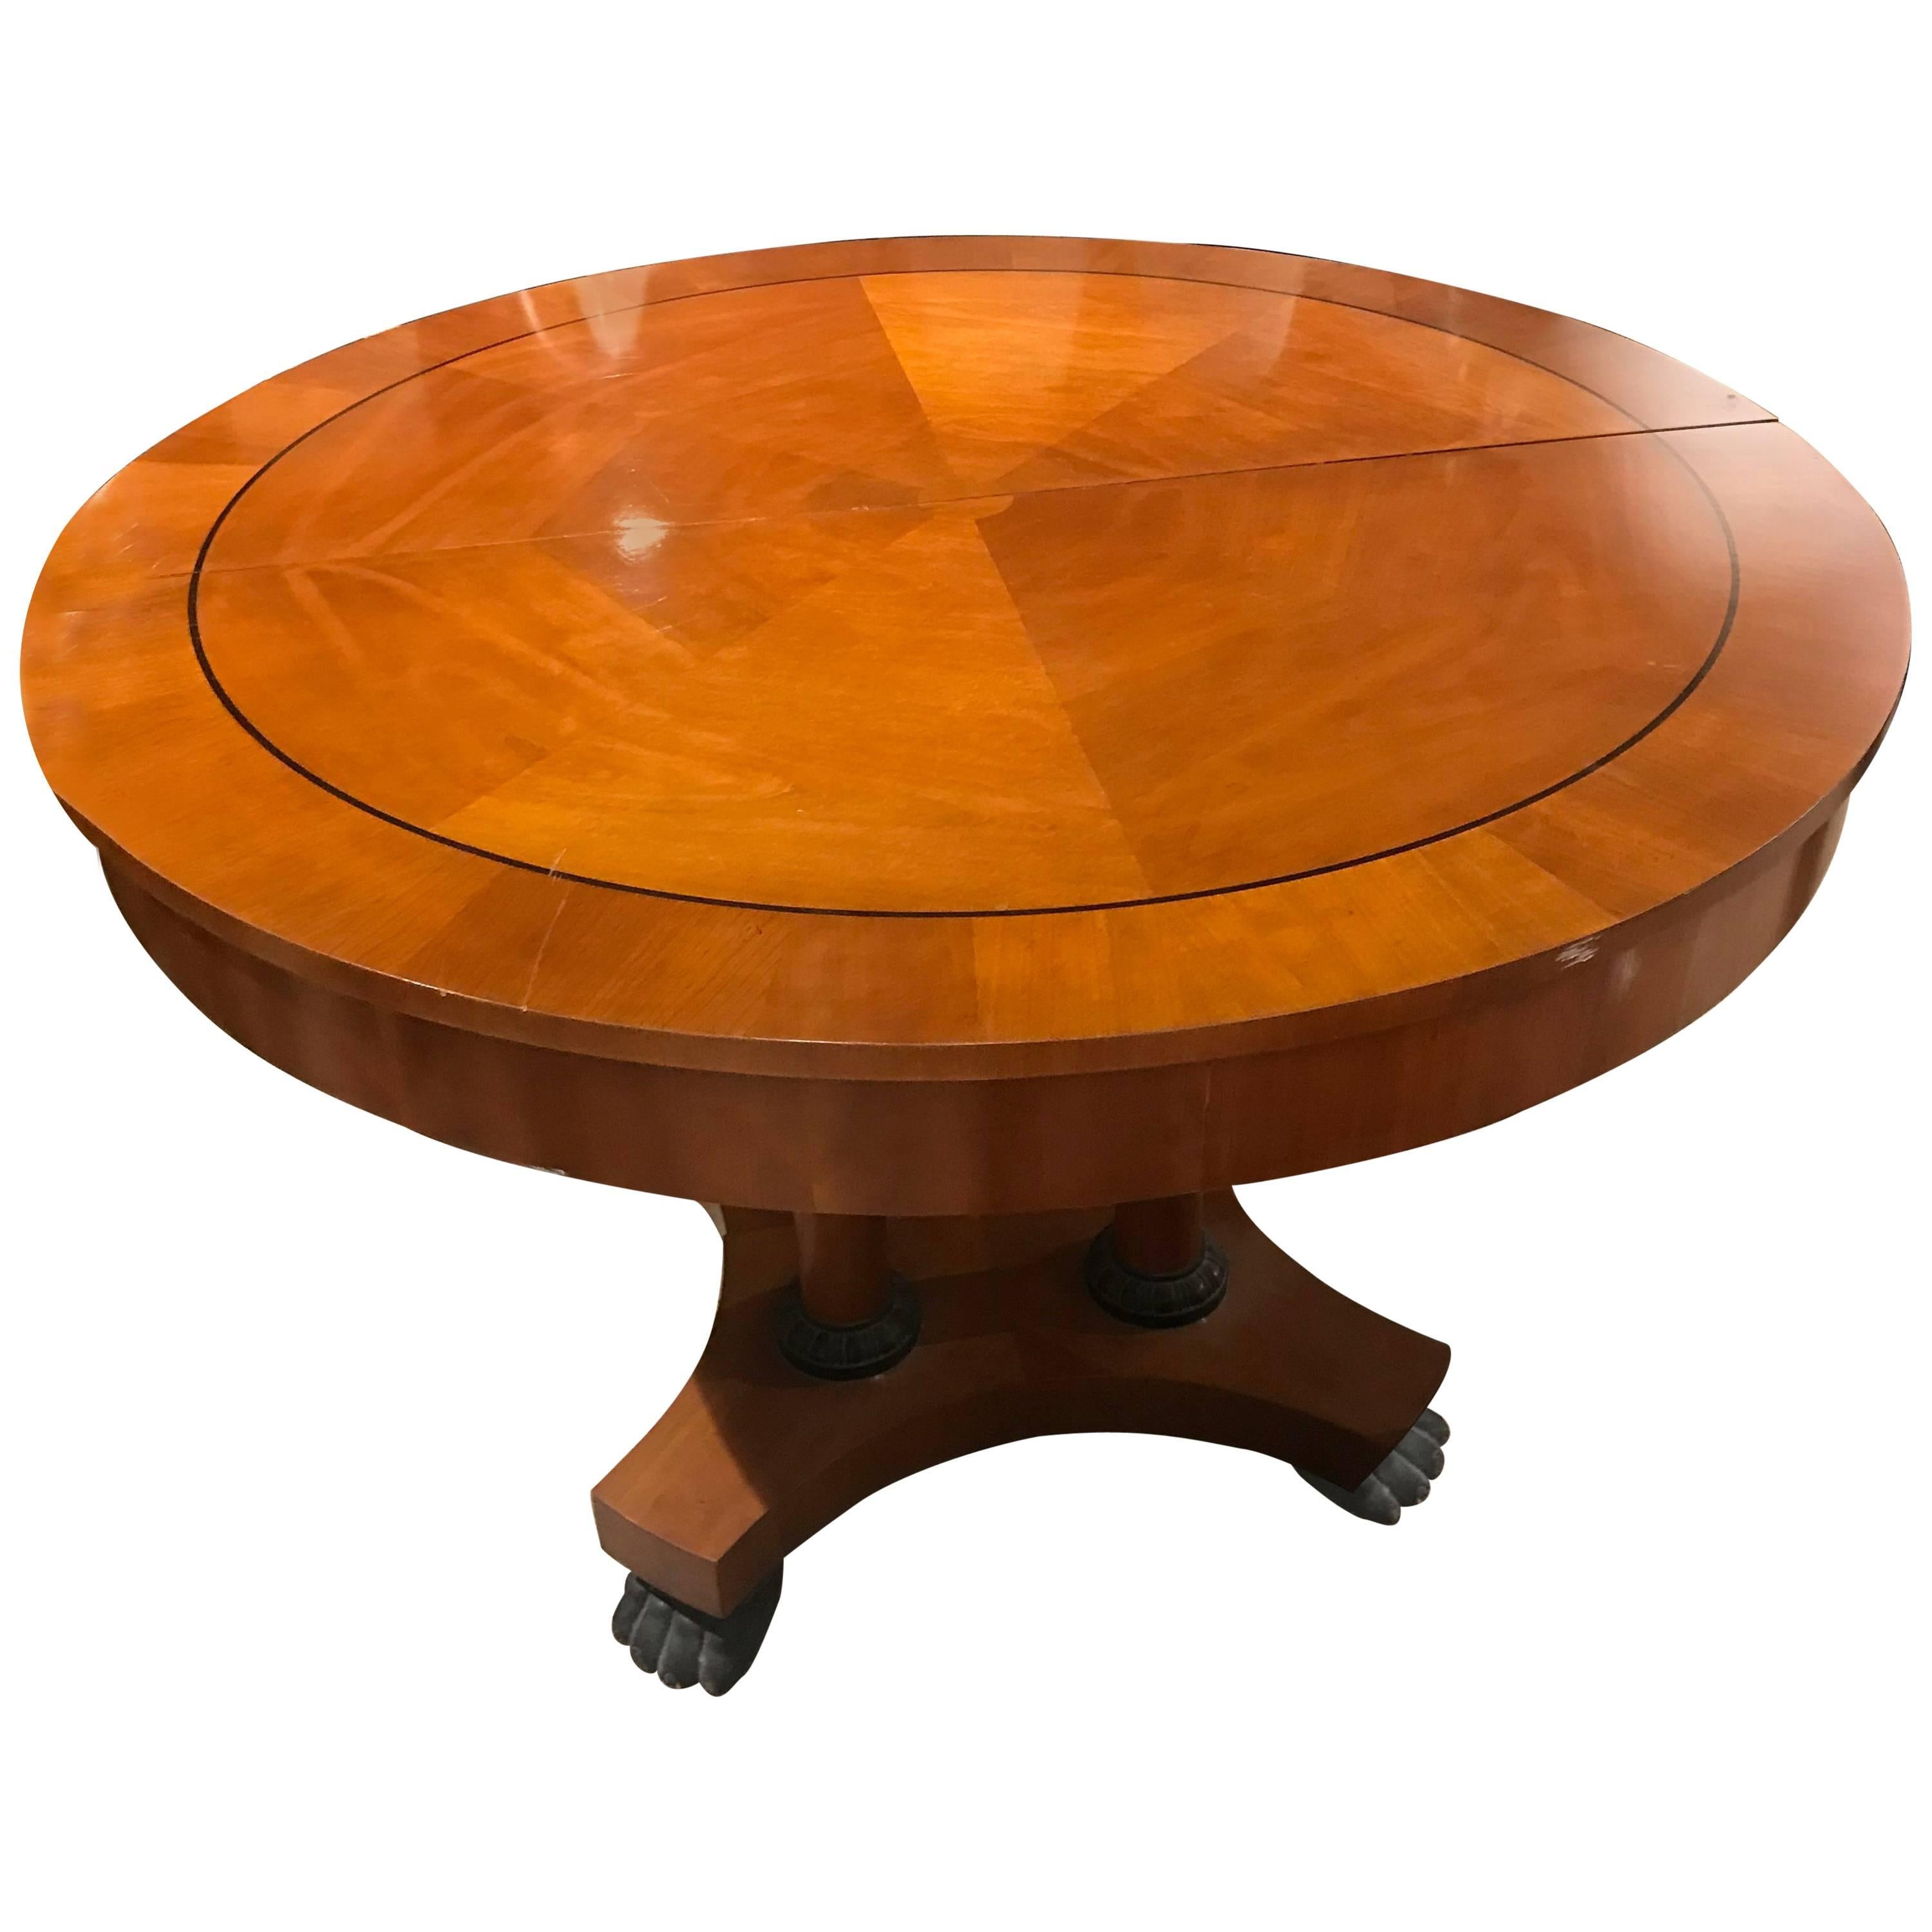 Modern Round Pedestal Fruitwood or Mahogany Dining Table by Baker Furniture